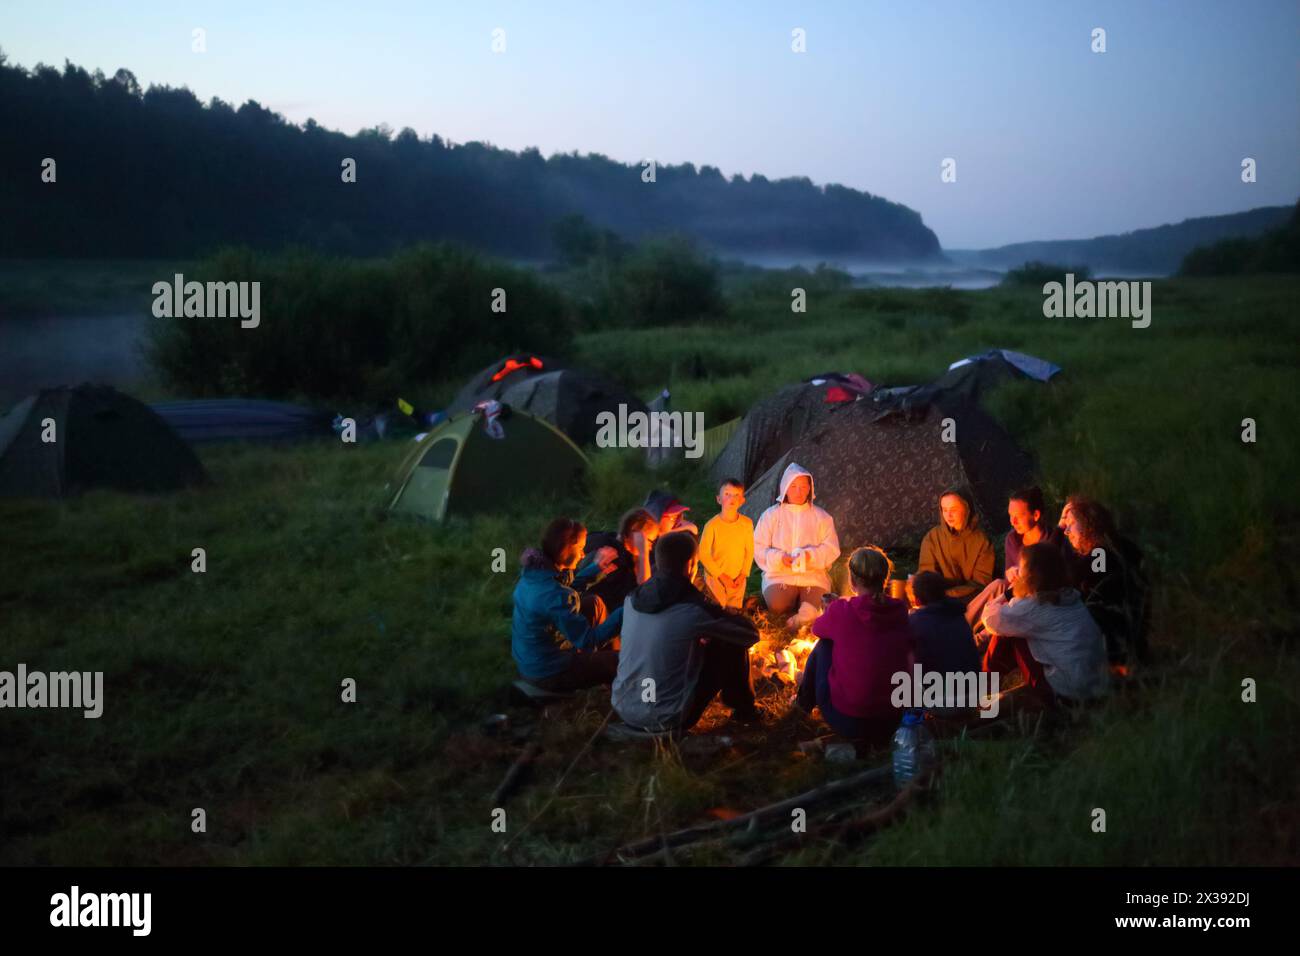 TVER REGION, RUSSIA - JUL 3, 2016: Tourists sits near fire near river. Tvertsa - river in Tver region of Russia. Length - 188 km. The river is used by Stock Photo